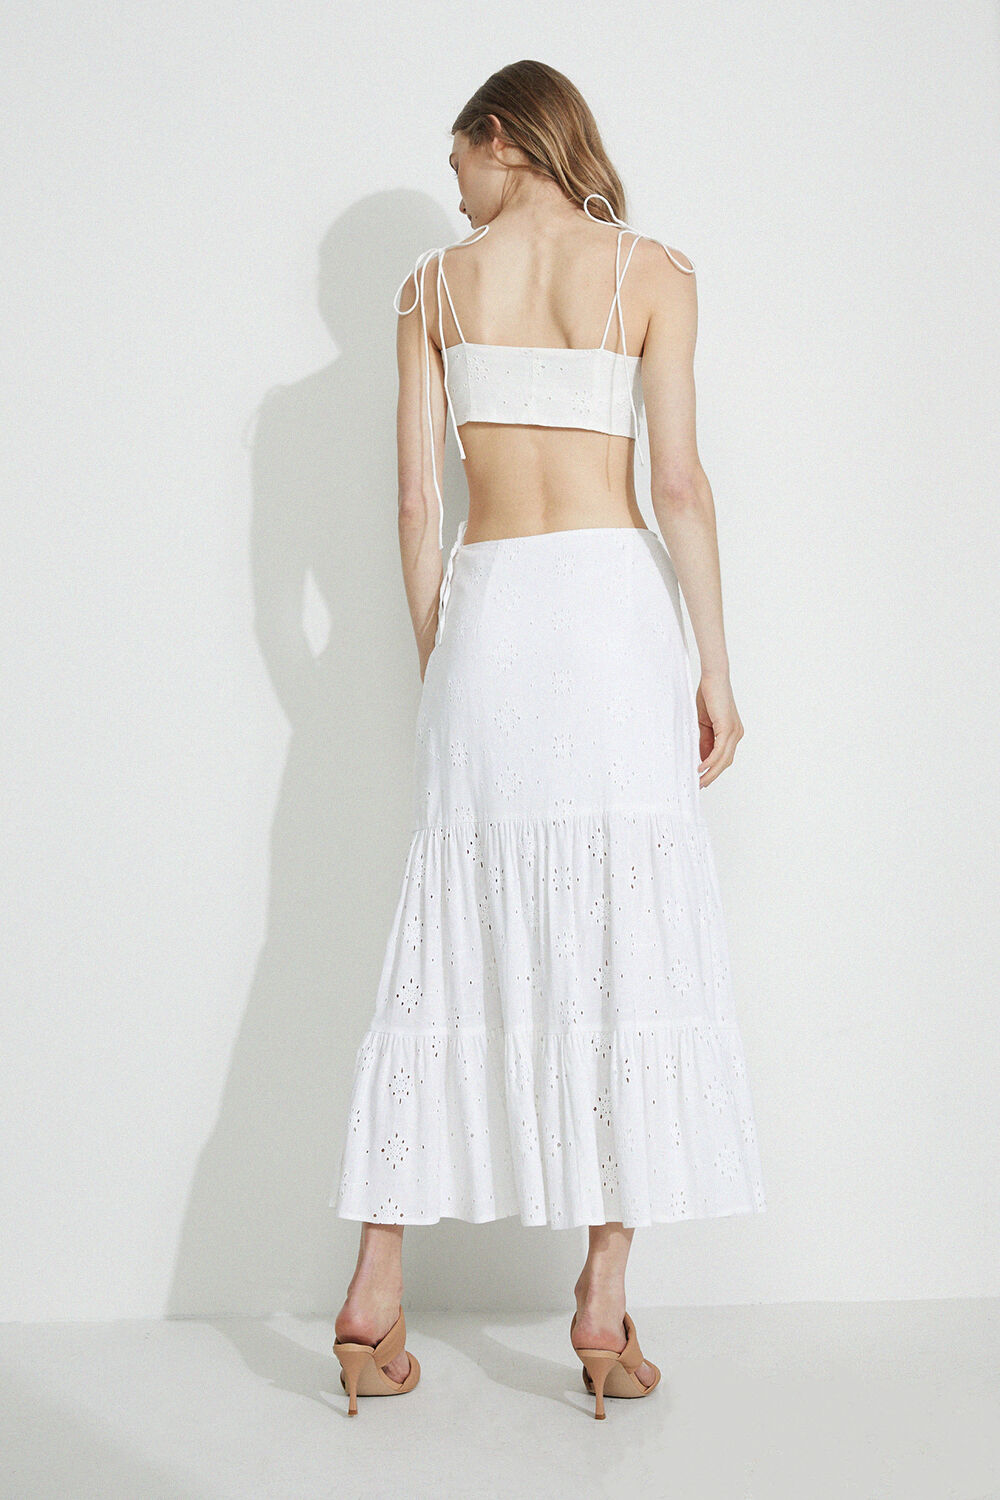 BRODERIE SKIRT in colour CLOUD DANCER